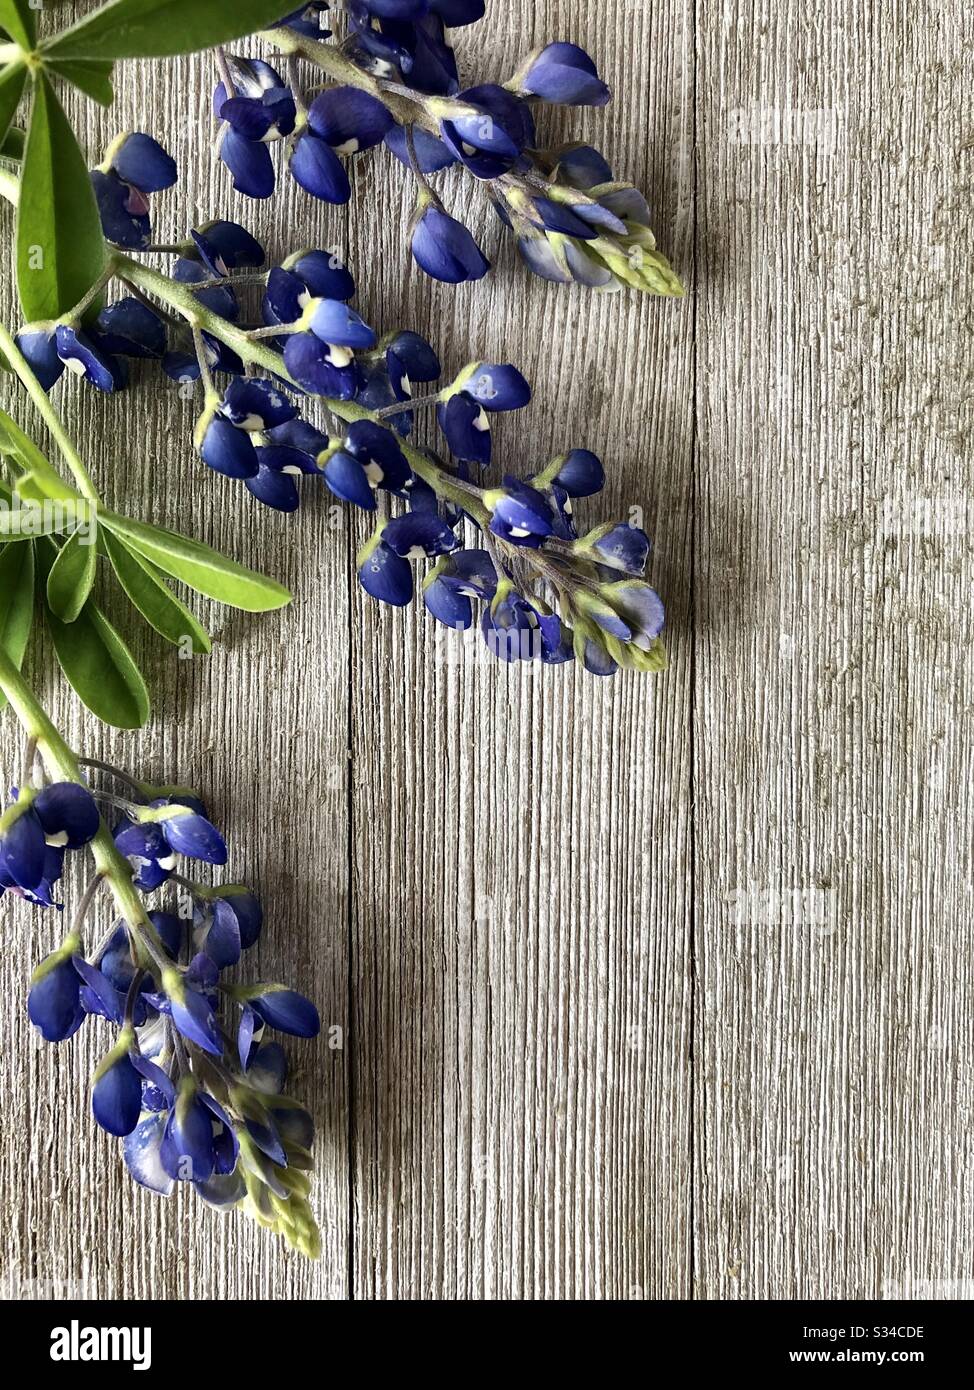 Bluebonnets on a rustic wooden background Stock Photo